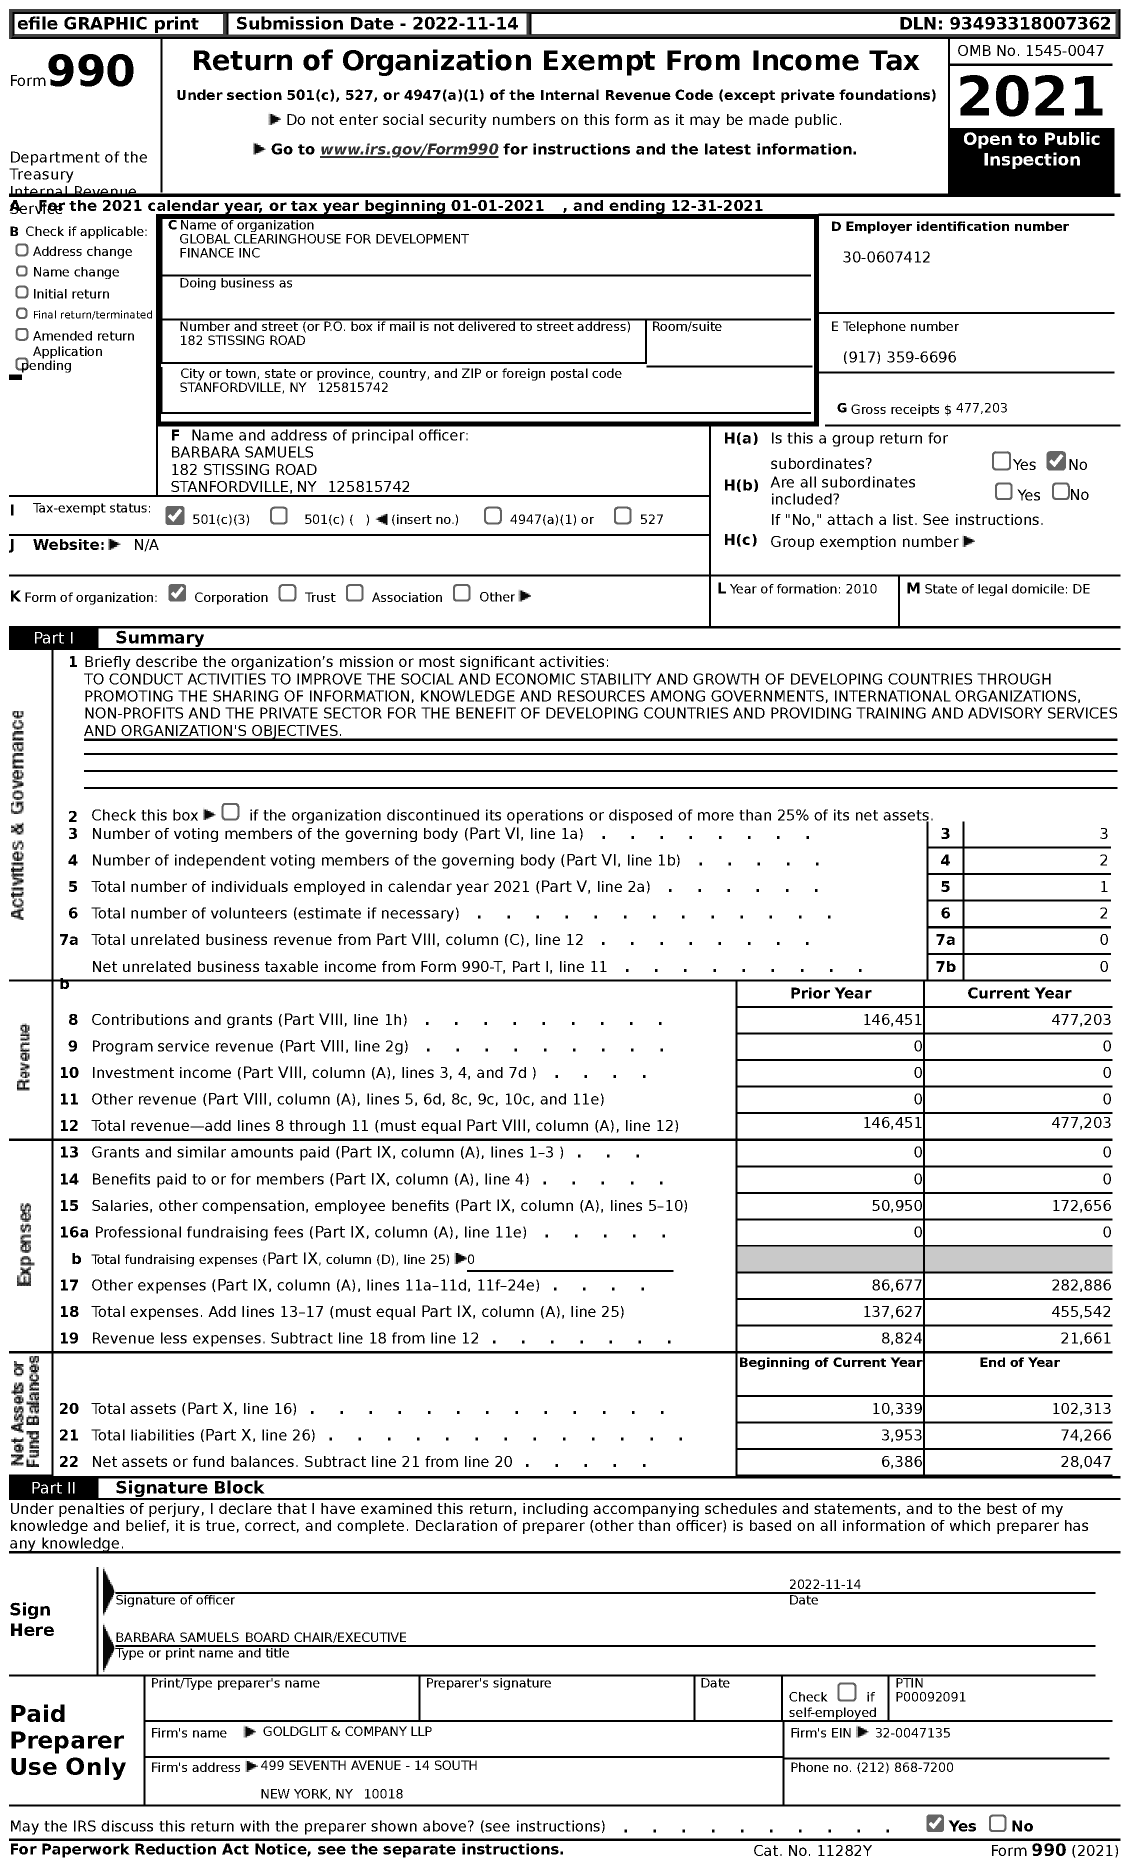 Image of first page of 2021 Form 990 for Global Clearinghouse for Development Finance